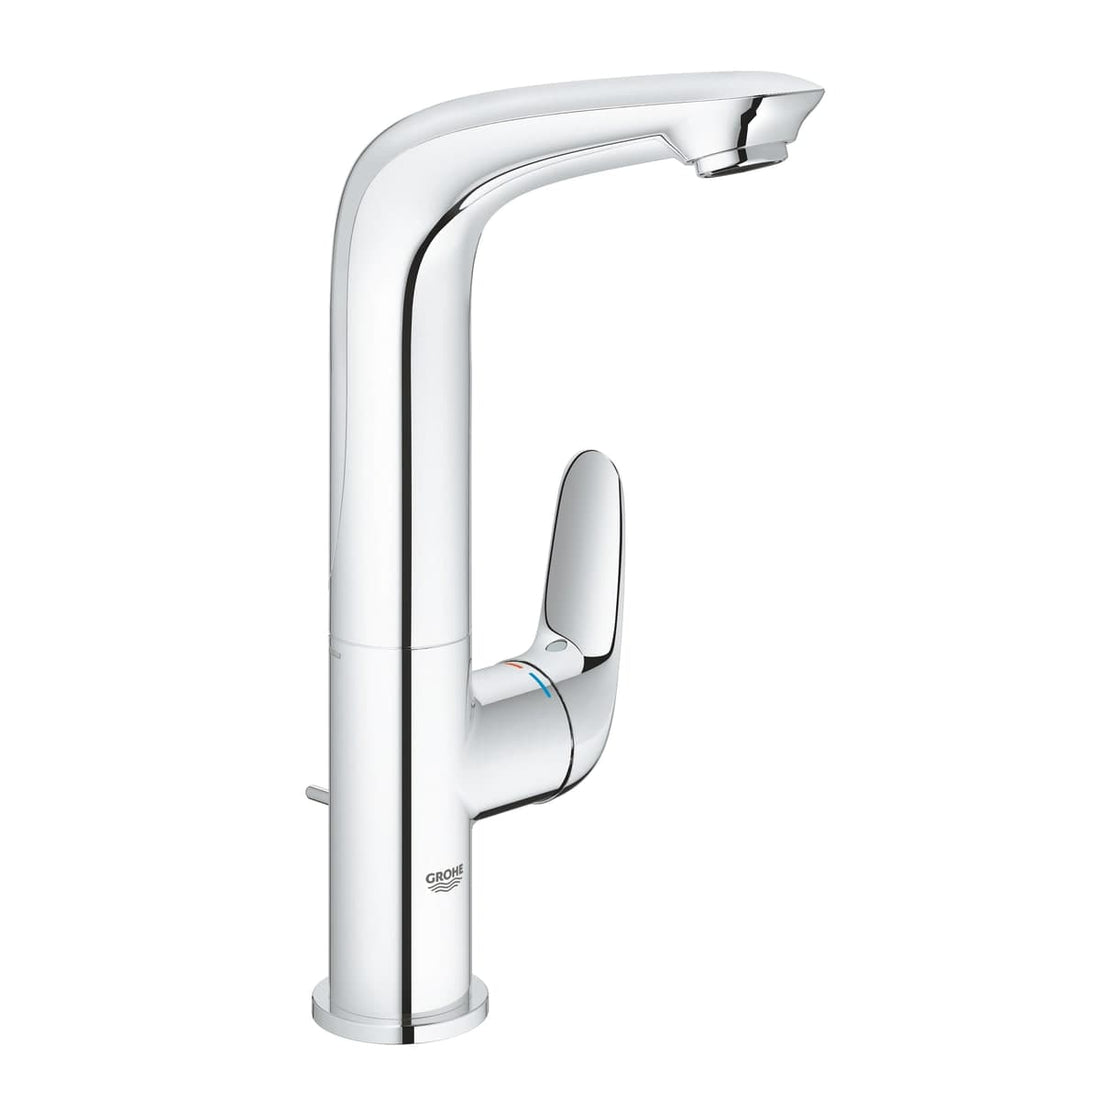 GROHE ESTYLE NEW WASHBASIN MIXER HIGH SPOUT CHROME W/DRAIN - best price from Maltashopper.com BR430009025